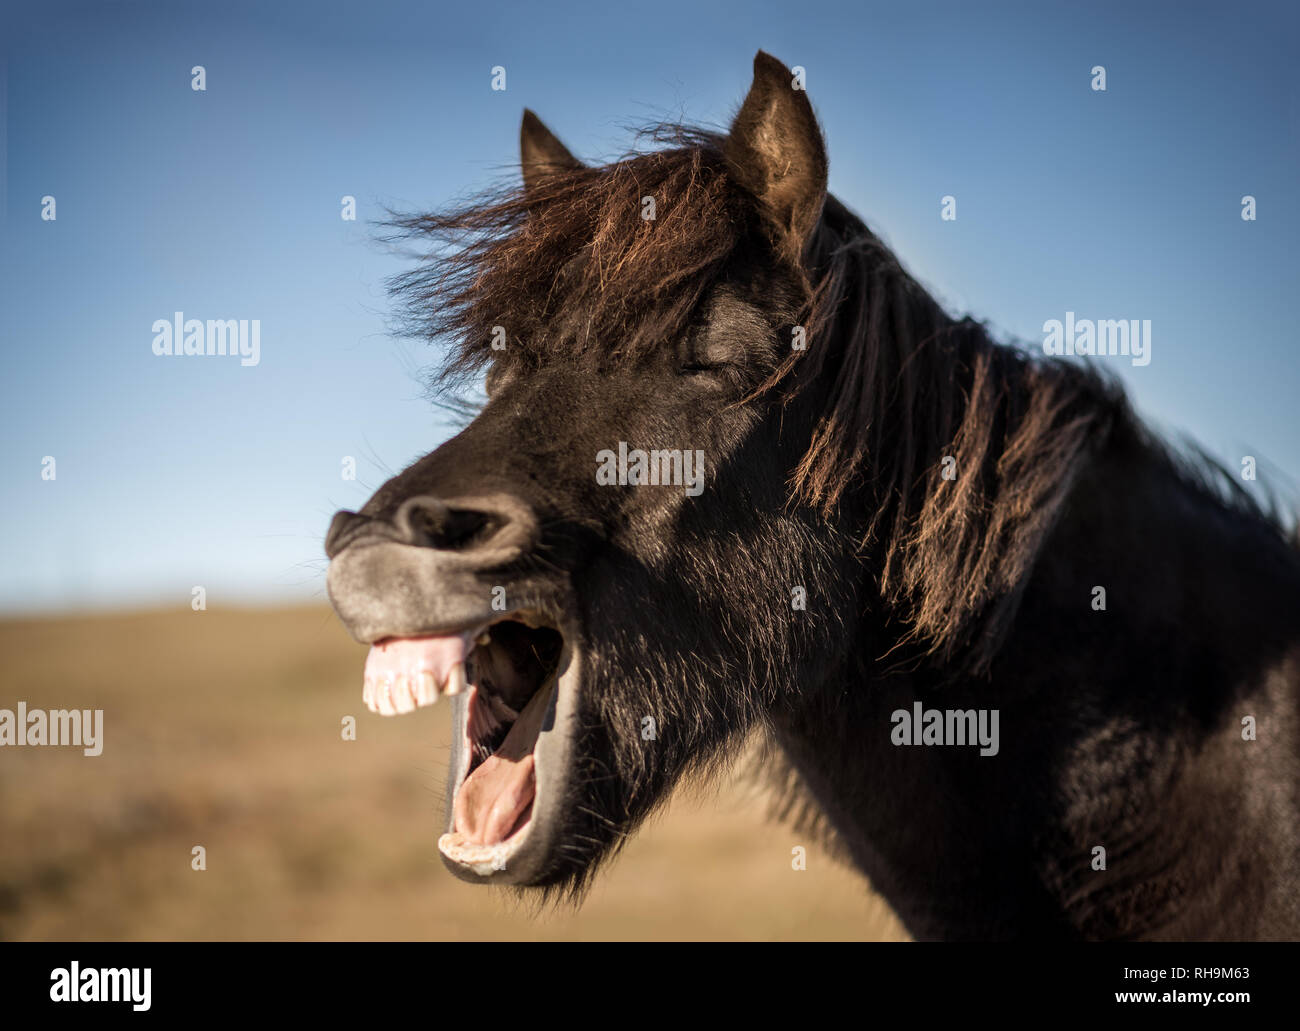 Portrait of black, laughing horse Stock Photo